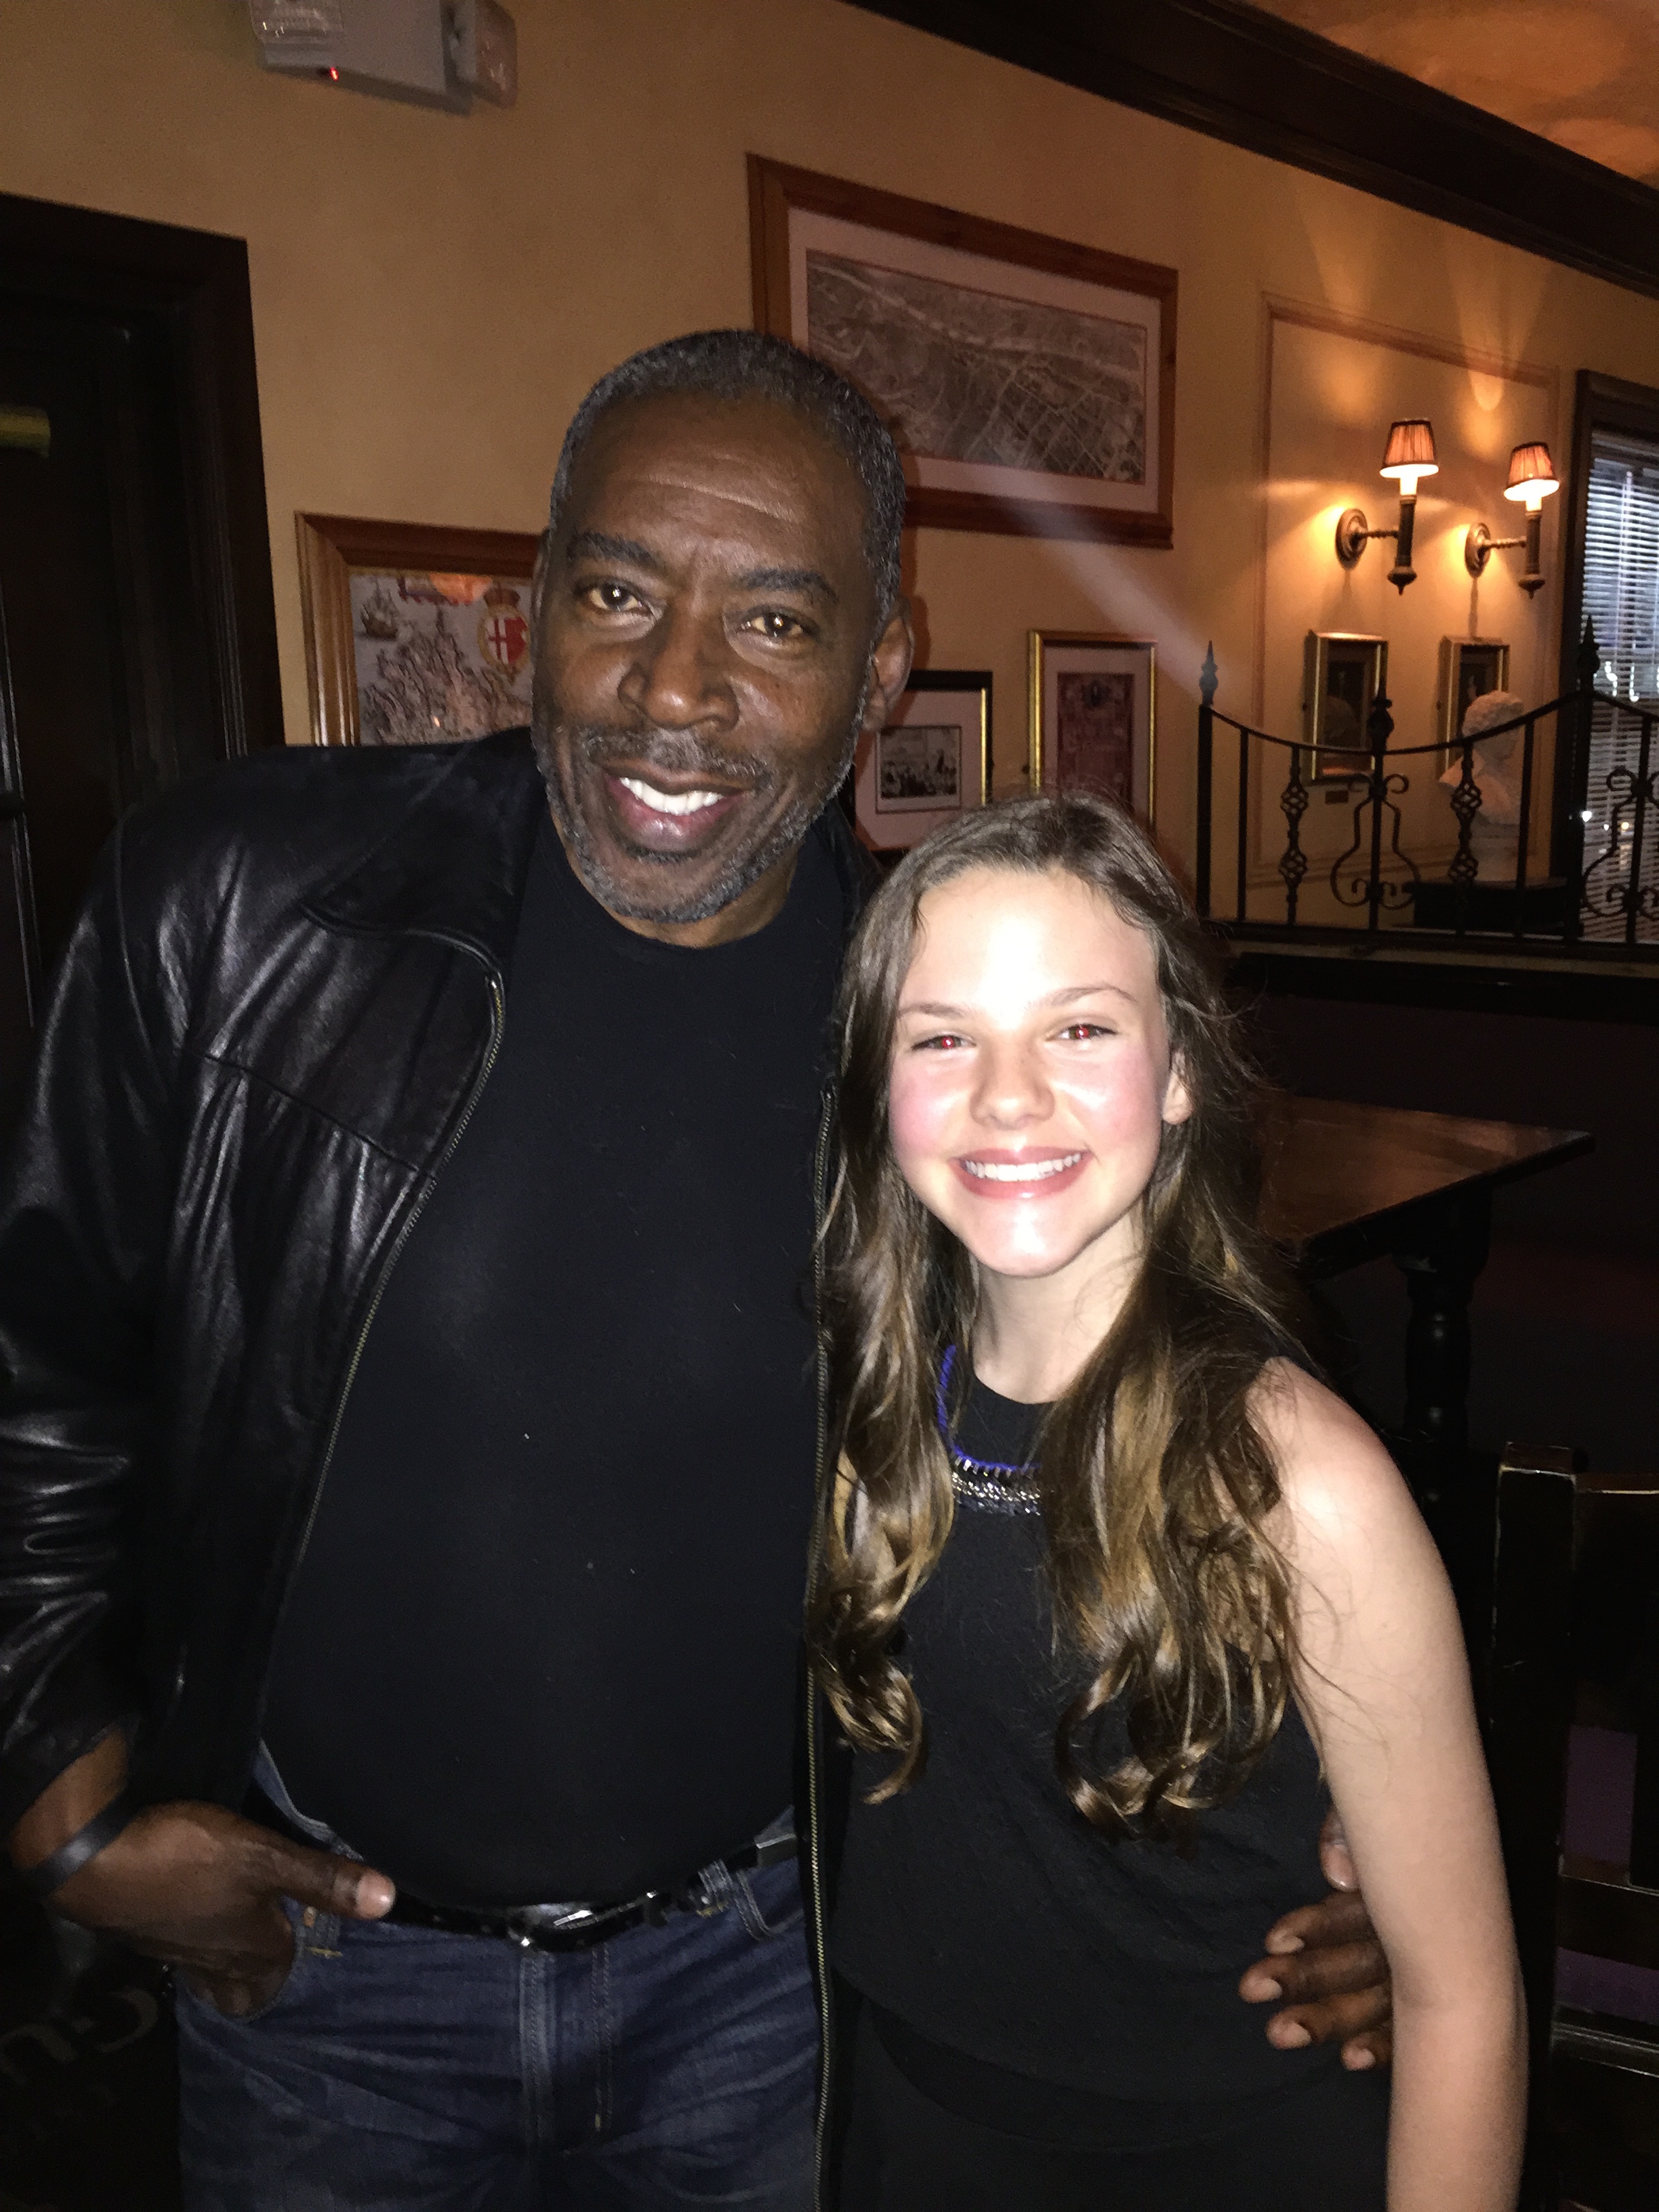 Megan pictured with Gallows Road co-star Ernie Hudson at the USA Film Festival